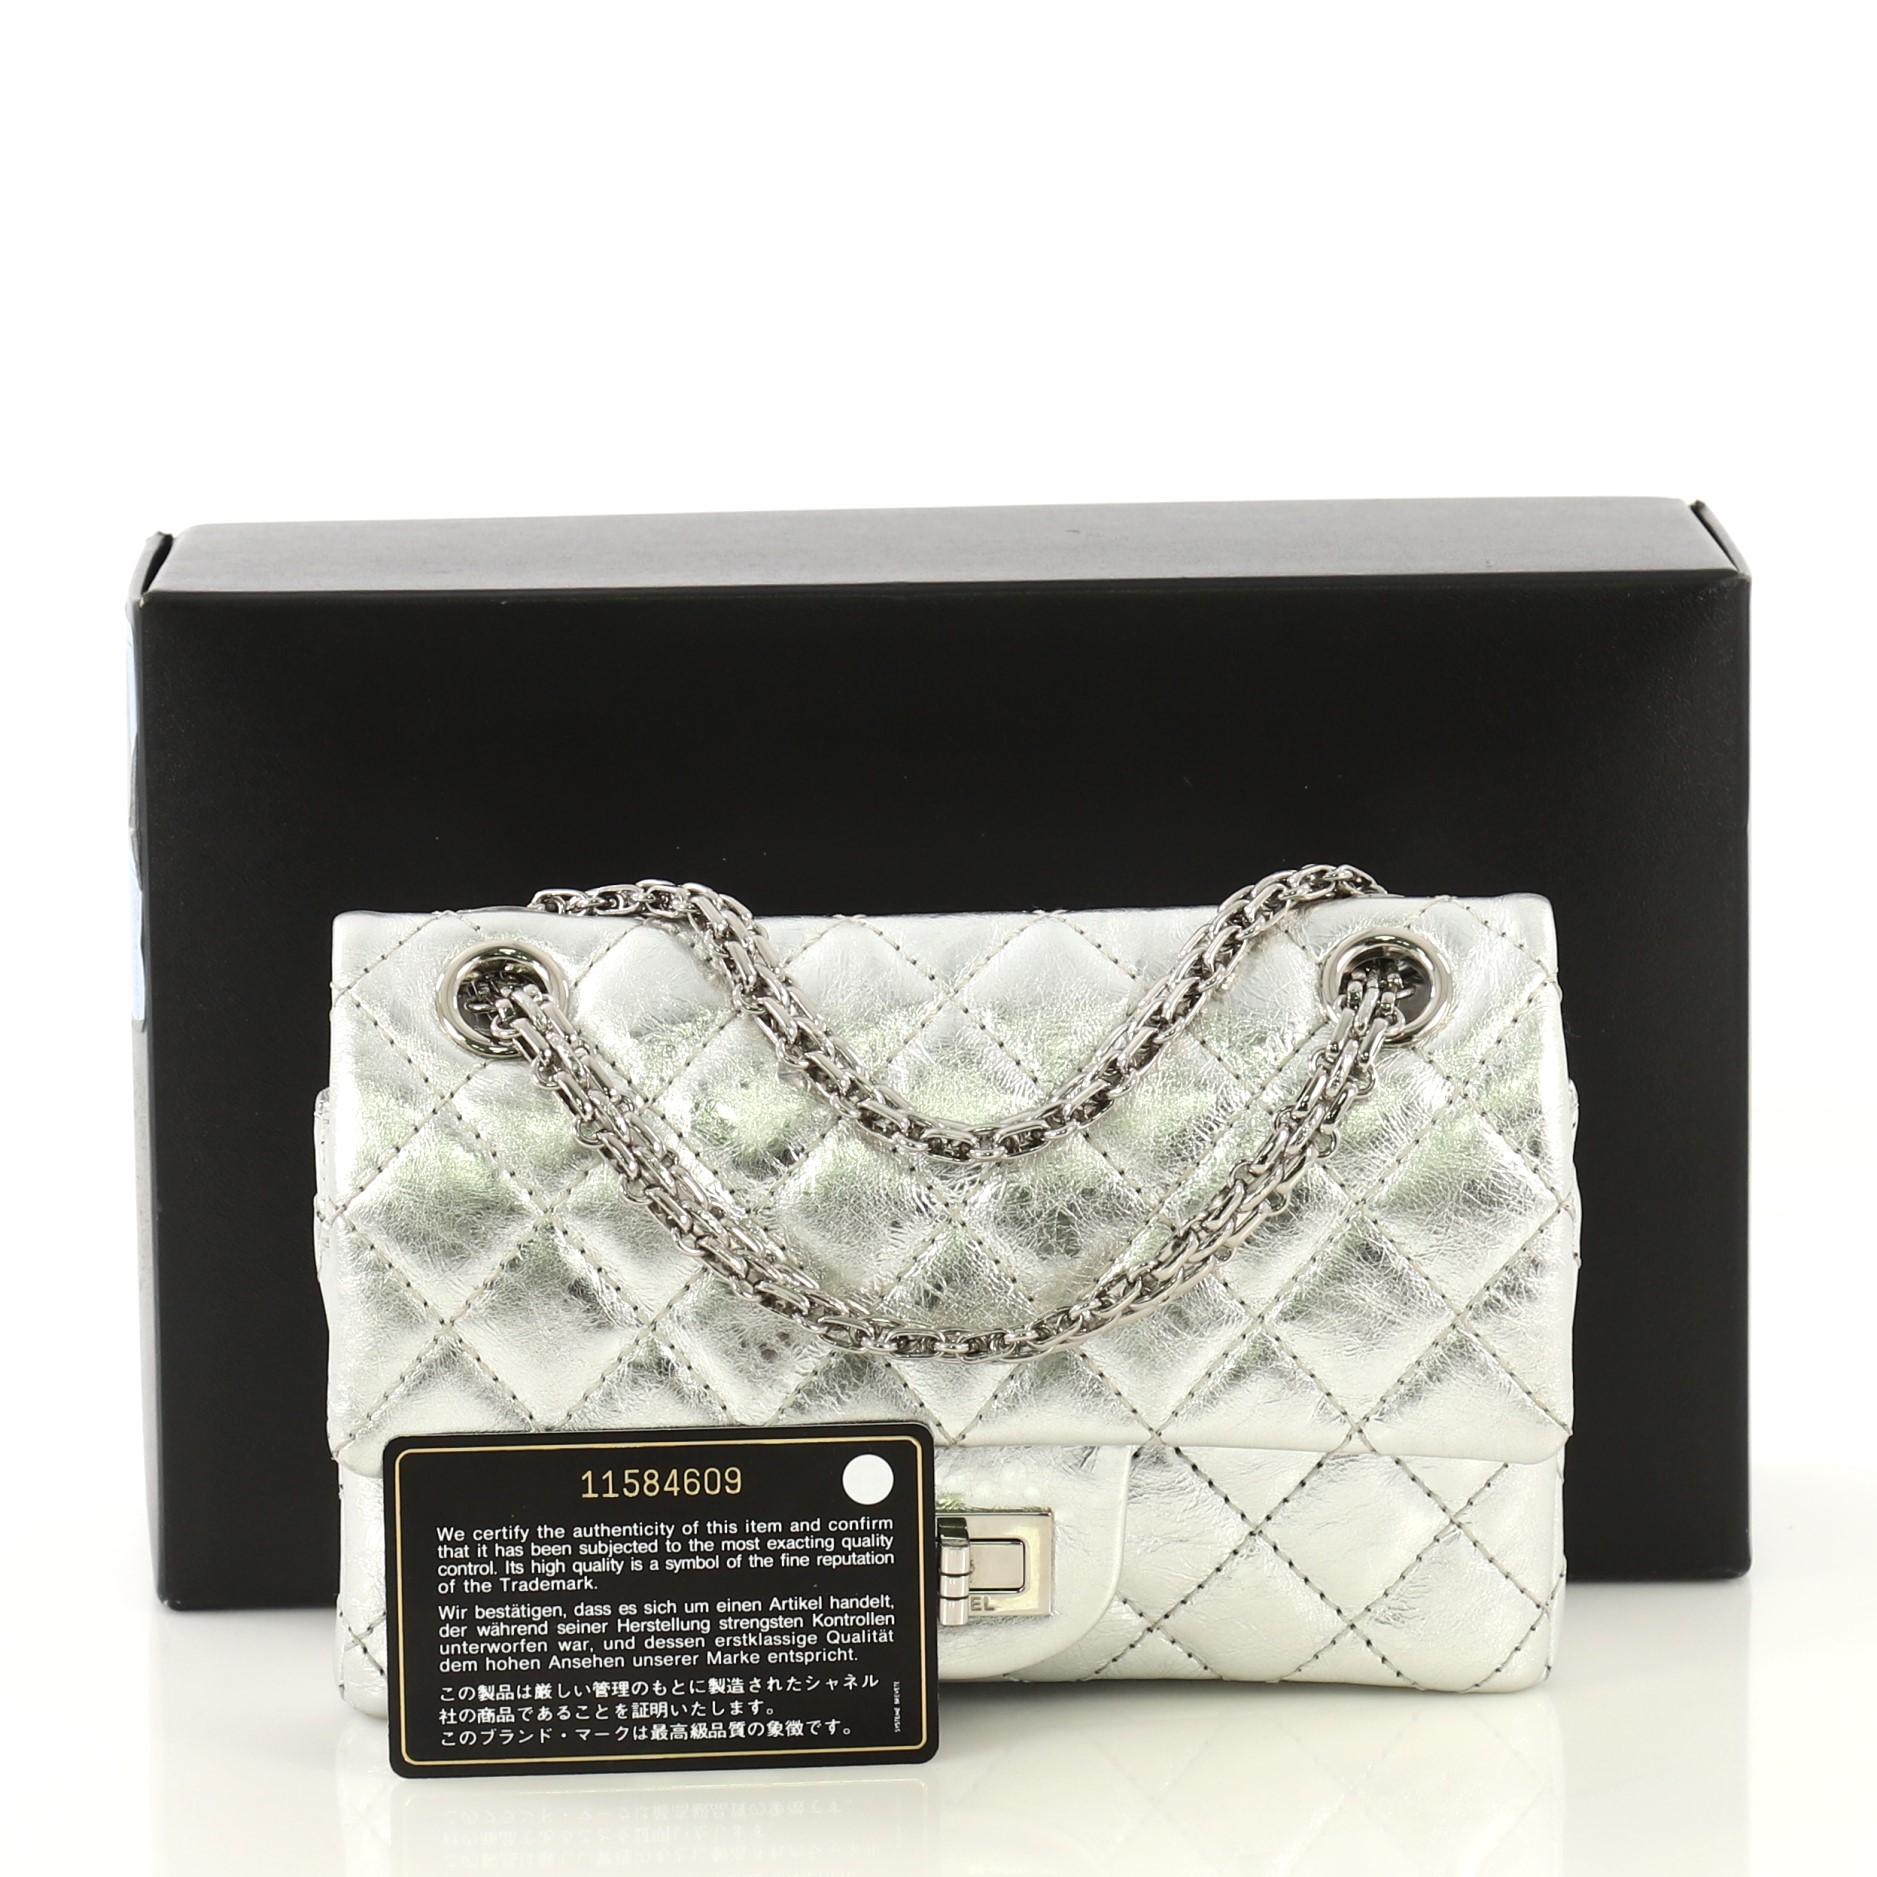 This Chanel Reissue 2.55 Flap Bag Quilted Metallic Aged Calfskin 224, crafted from metallic silver quilted aged calfskin leather, features reissue chain link strap and silver-tone hardware. Its mademoiselle turn-lock closure opens to a metallic